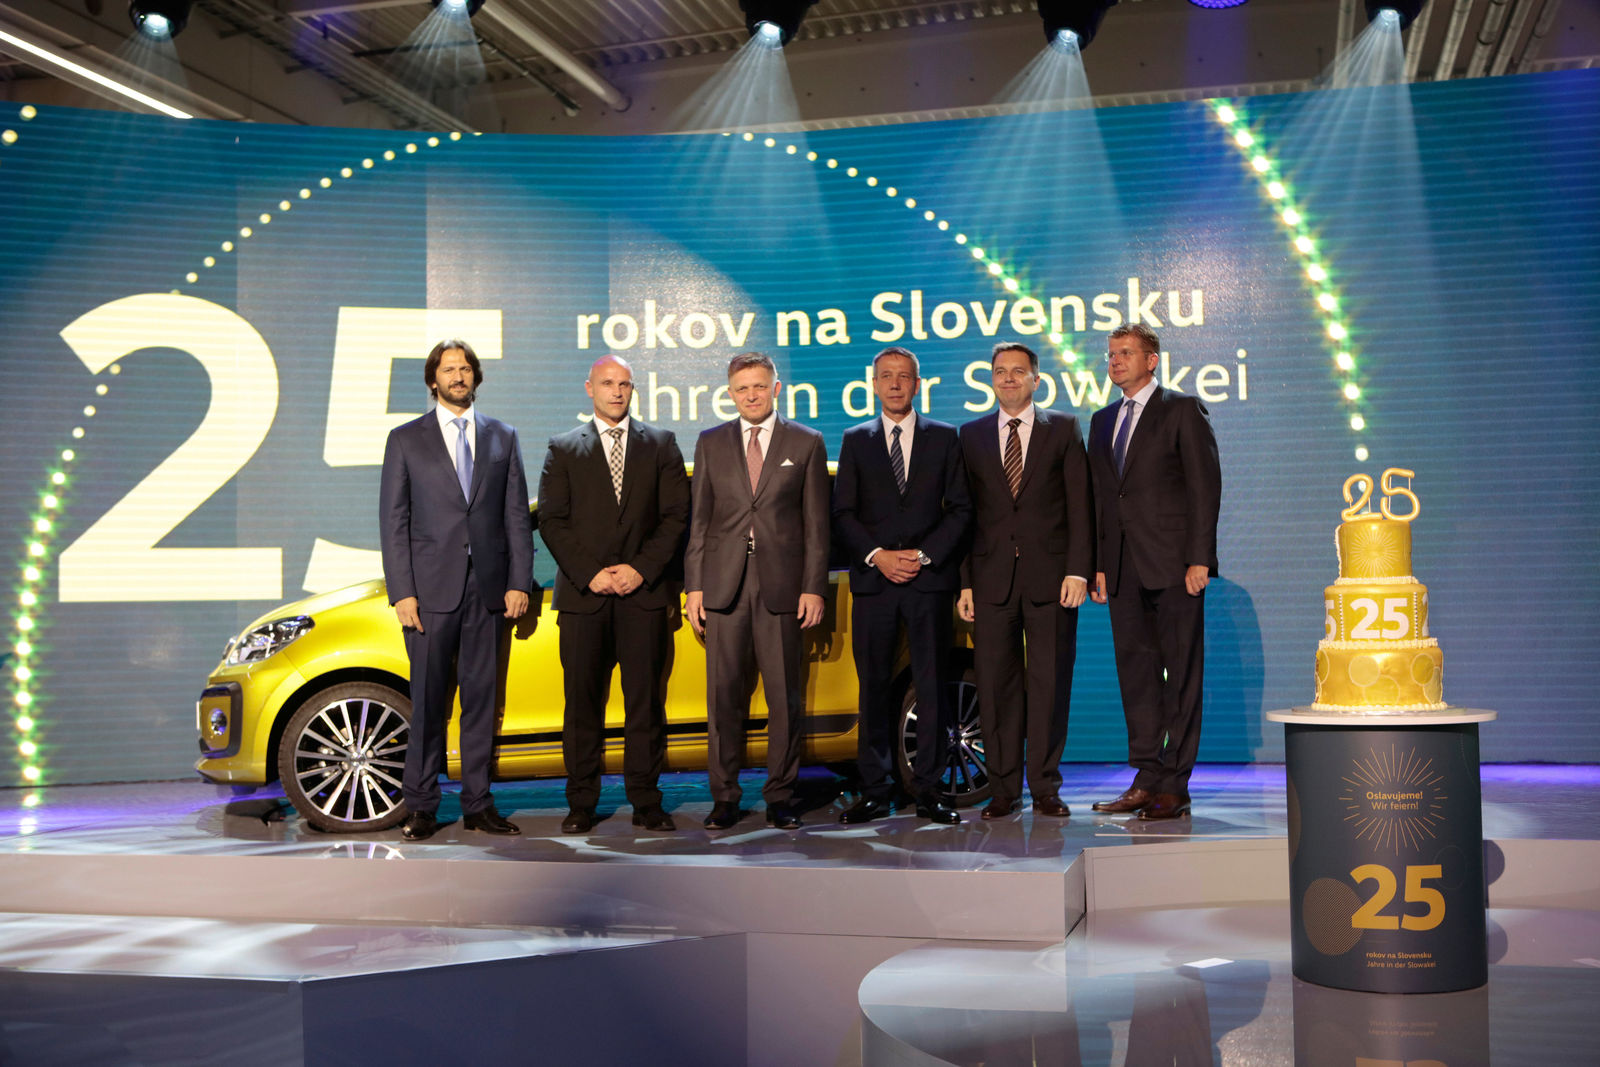 Slovak politicians visit Volkswagen Slovakia on the occasion of the company‘s 25th anniversary